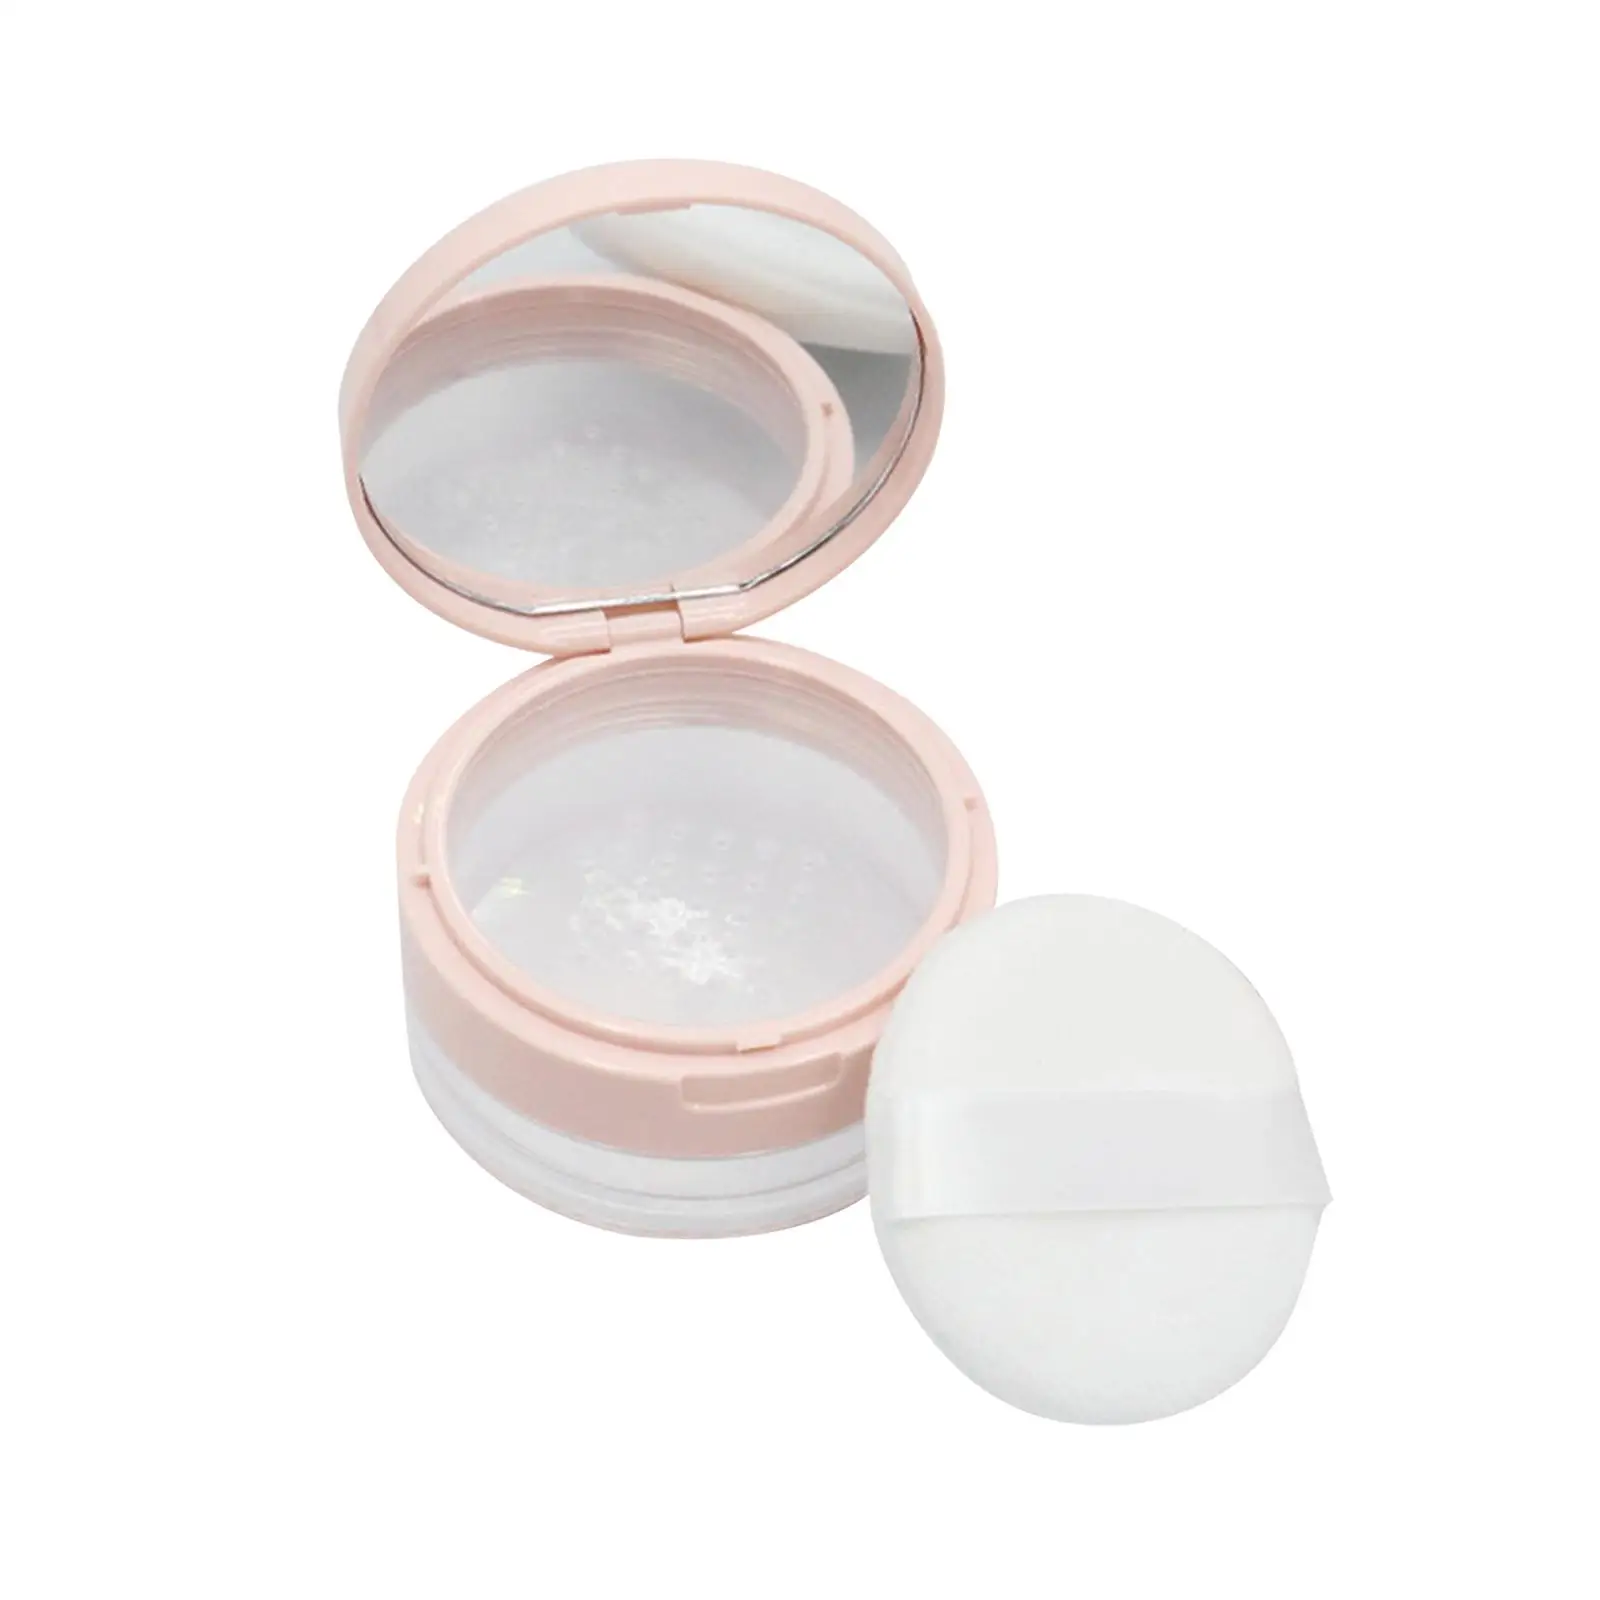 Makeup Powder Container with Puff Mirror DIY Cosmetic Jar Compact Travel Flip Lid Capacity 20ml(0.67 oz) Loose Face Powder Case